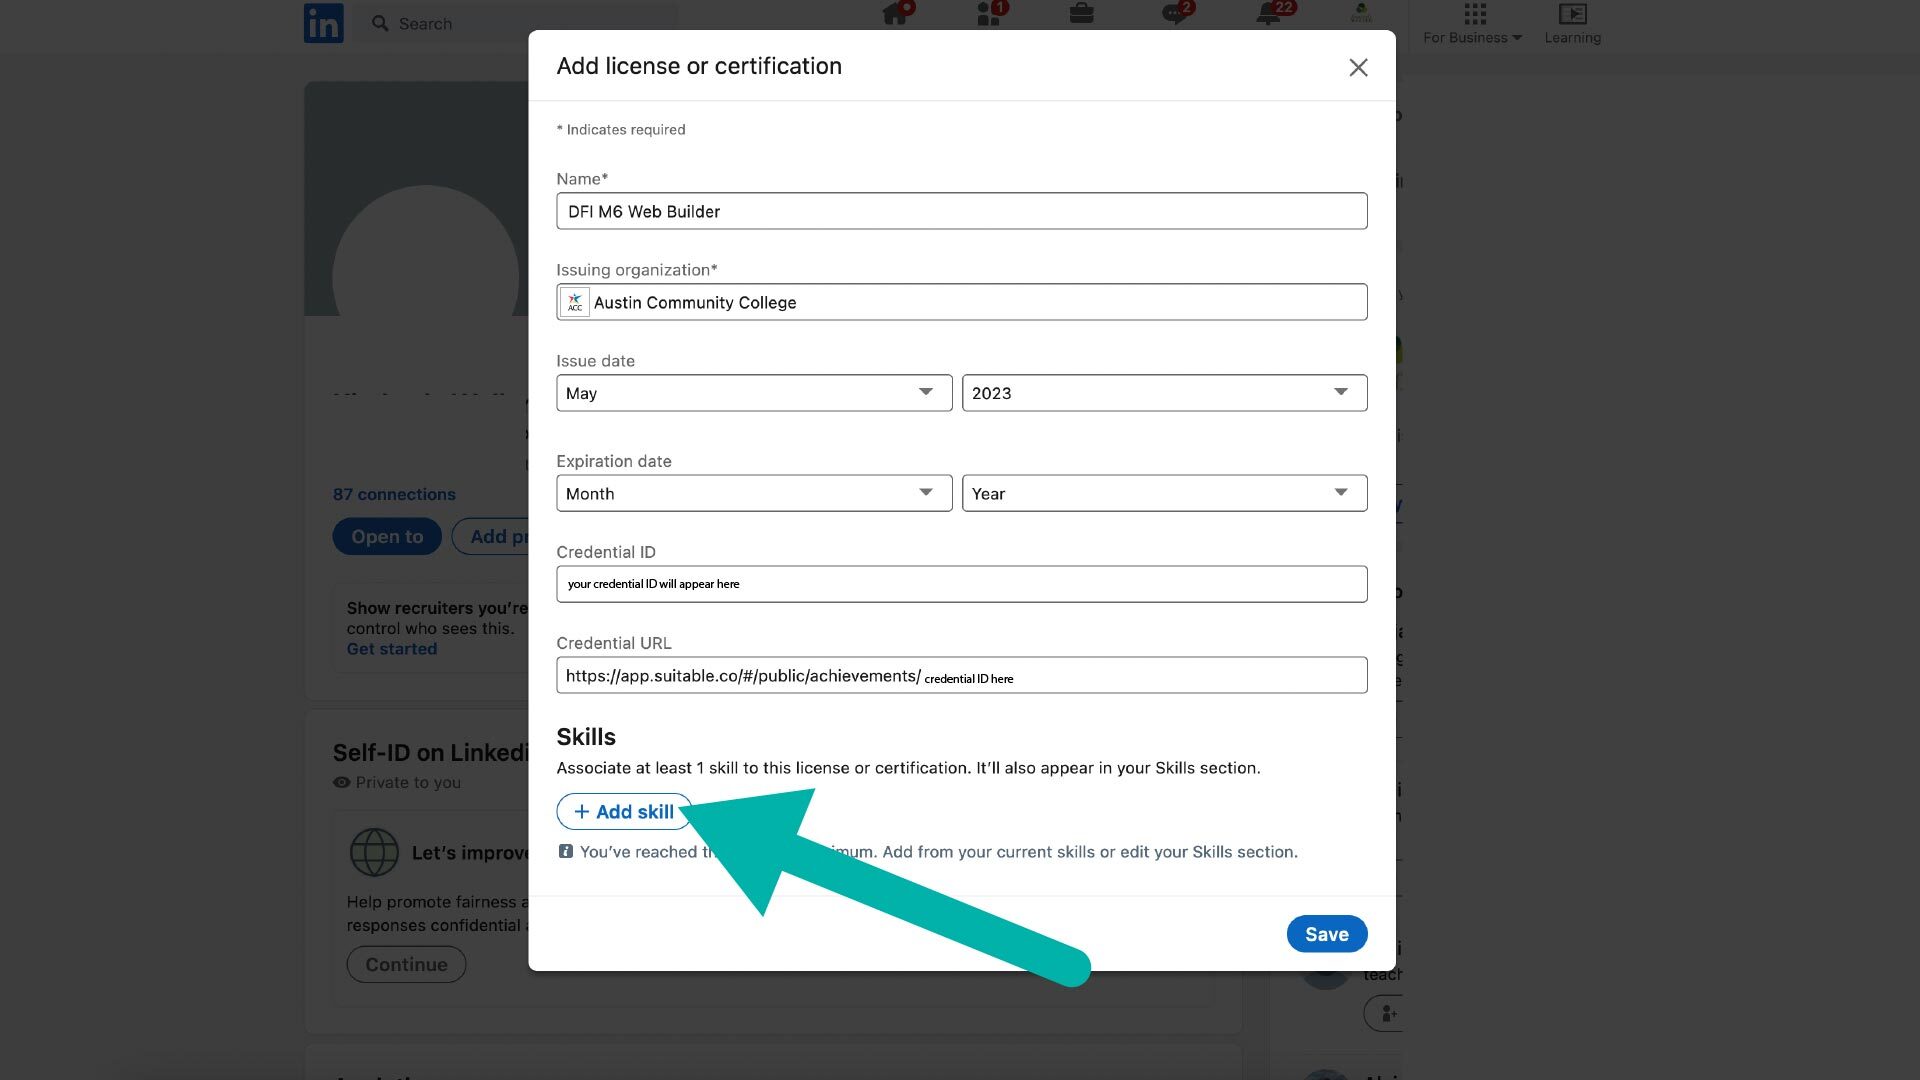 Screenshot of LinkedIn popup showing how to add a license or certification to their profile. An arrow is pointed at the "+ Add skill" button in the Skills section, to instruct ACC students in their process of adding their Suitable badge